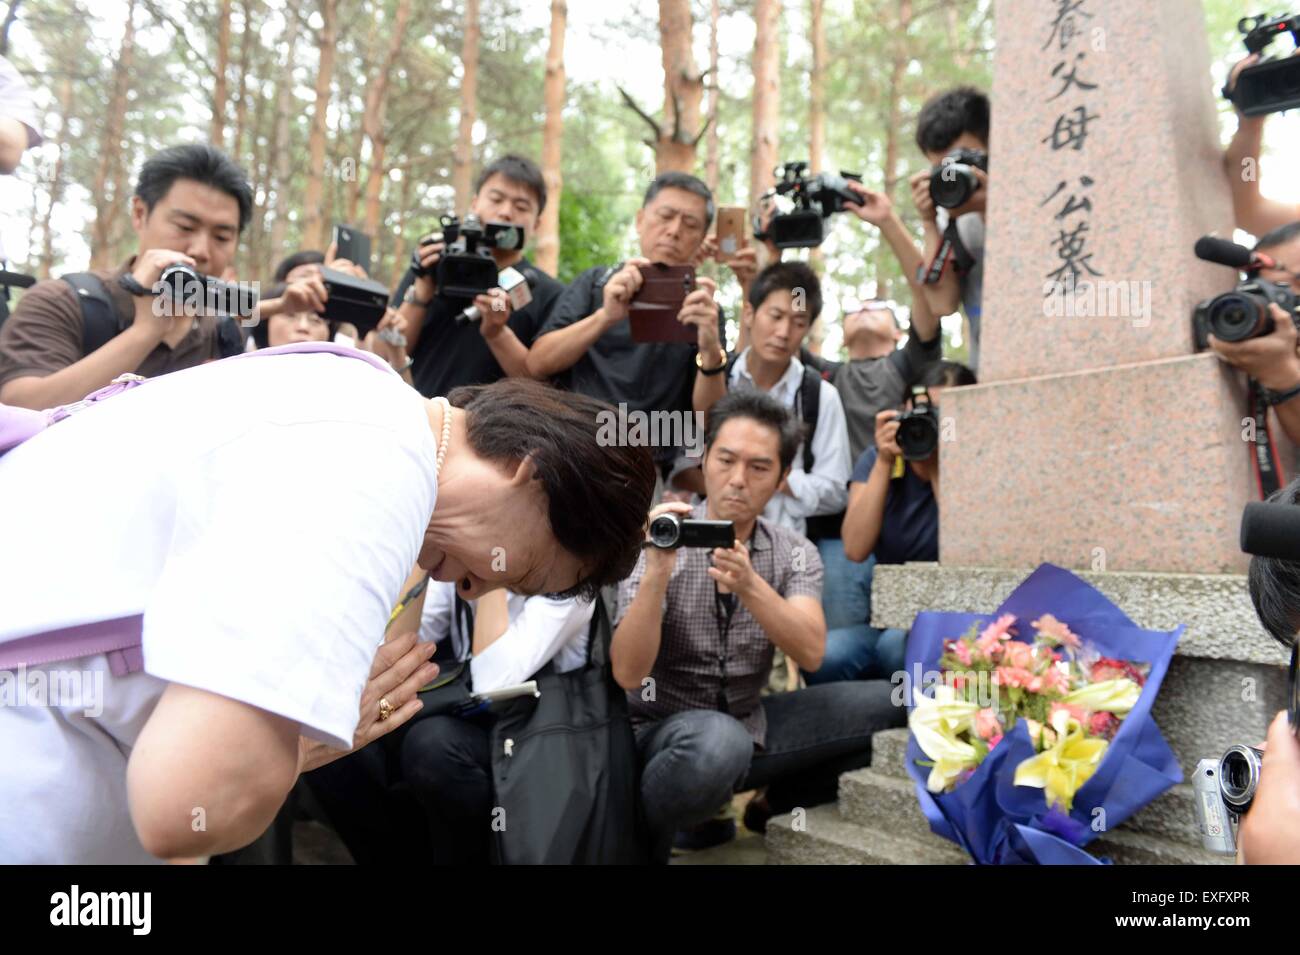 (150714) -- HARBIN, July 14, 2015 (Xinhua) -- Ikeda Sumie, director general of a Tokyo support group for those Japanese returned from China, mourns for adoptive parents in front of a grave in a cemetery to memorize adoptive Chinese parents in Fangzheng County near Harbin, capital of northeast China's Heilongjiang Province, July 13, 2015. A group of 54 Japanese citizens, all now orphans, on Monday paid a visit to the graves of their adoptive Chinese parents here. Abandoned by their birth parents during the hasty retreat at the end of World War II in 1945, the orphans, now over 70 years old, we Stock Photo